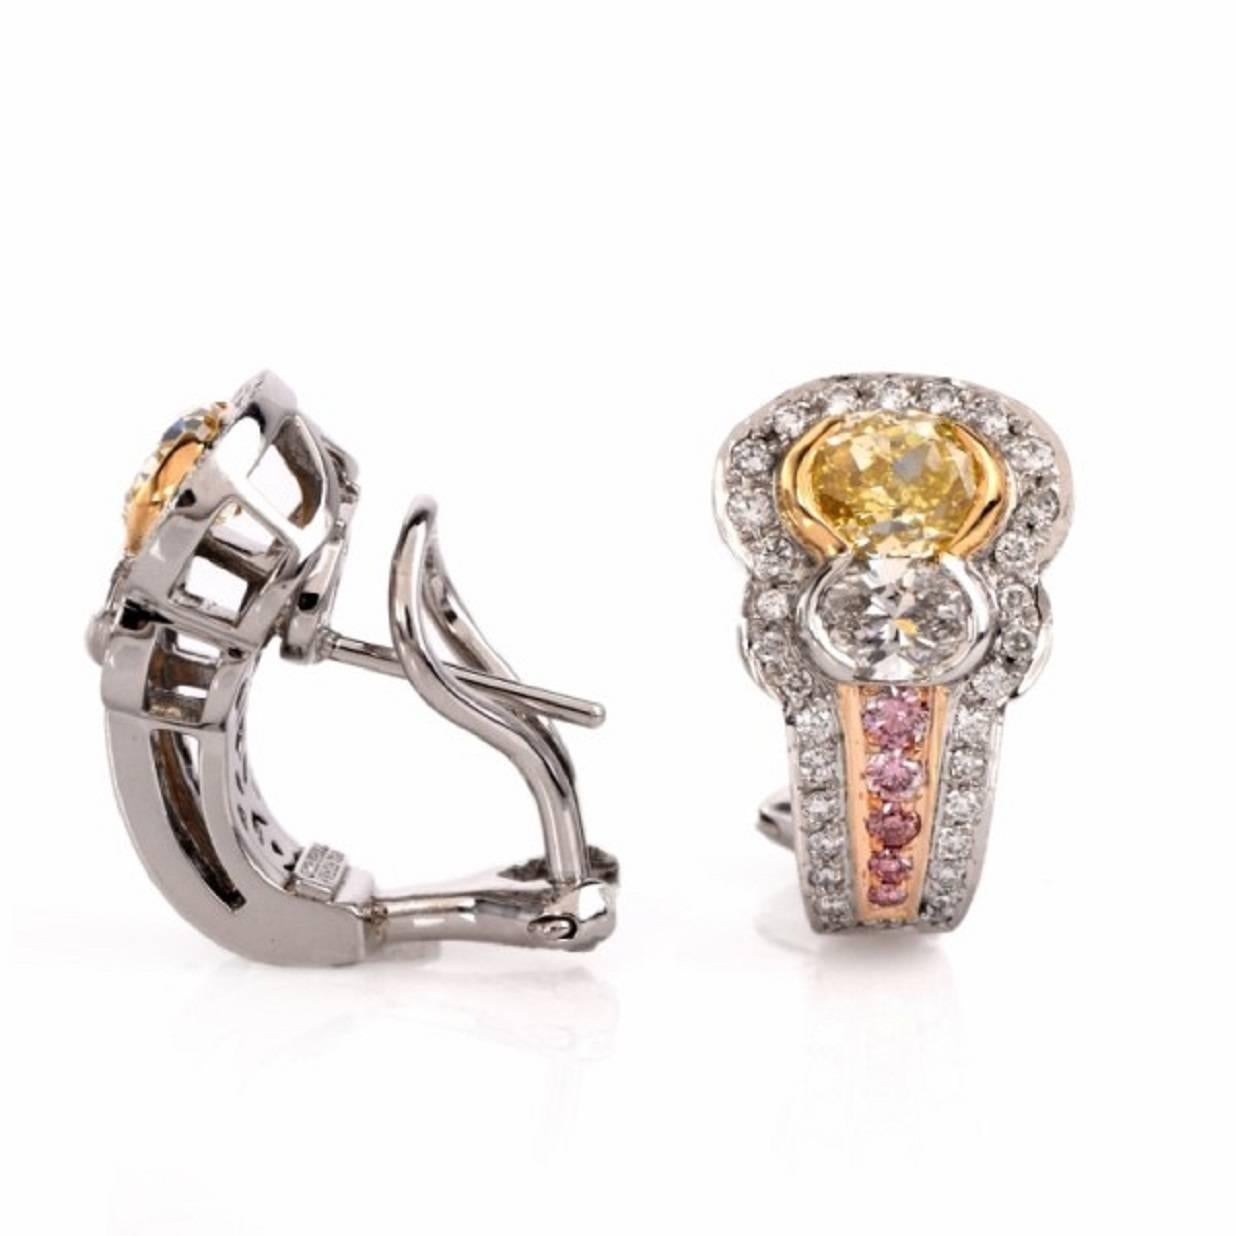 Modern C. Krypell Natural Fancy Yellow and Pink Diamond Platinum Earrings